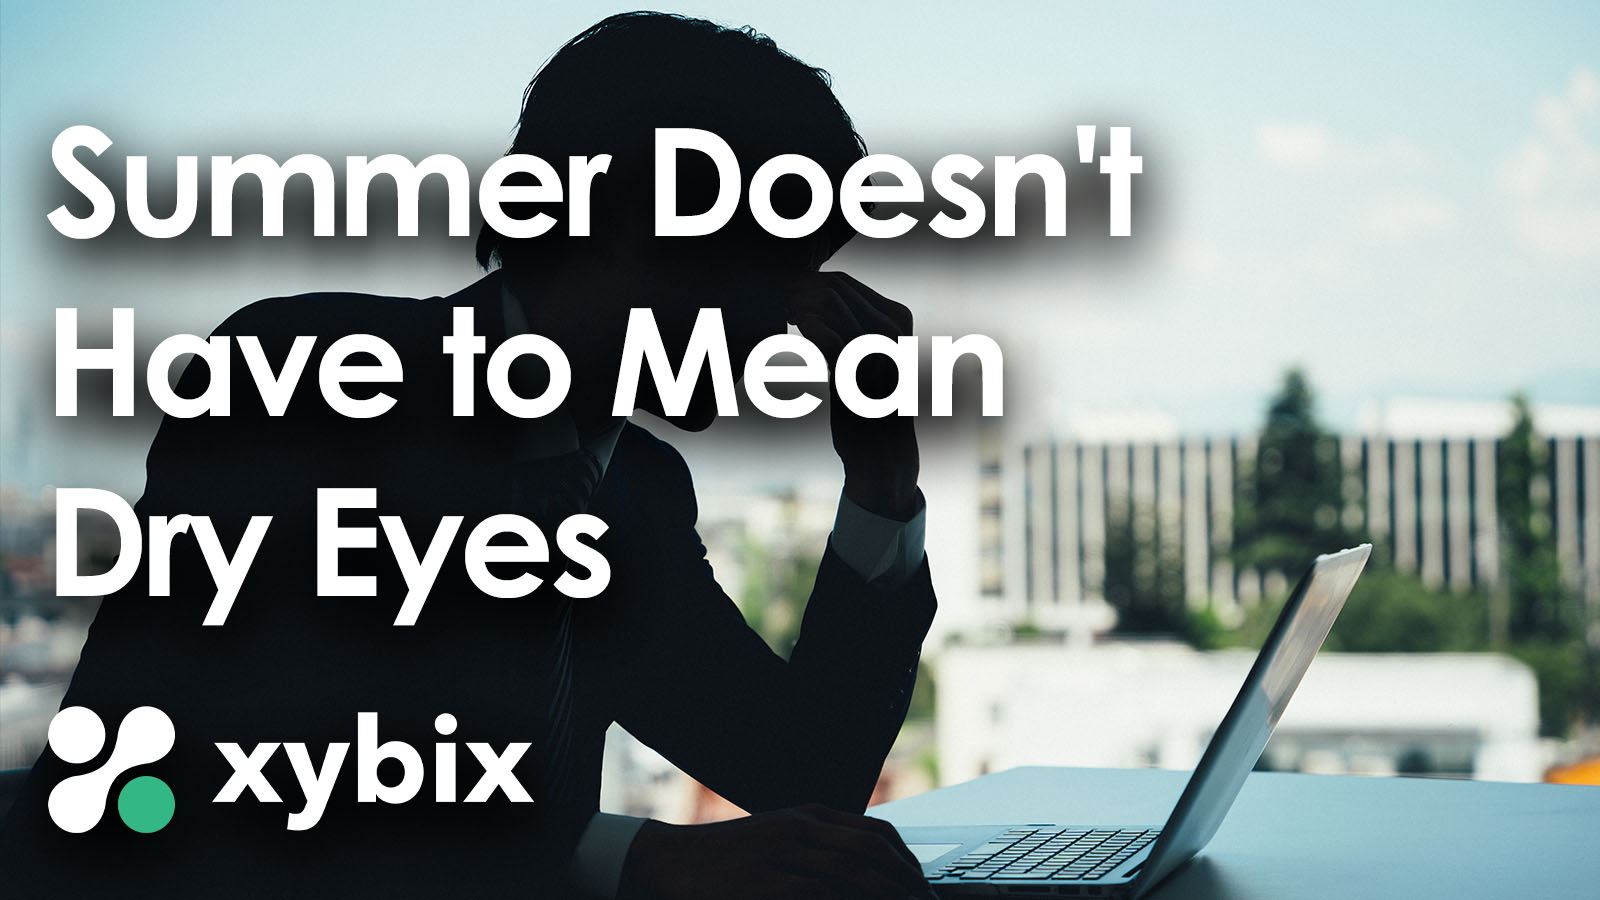 Summer Doesn't Have to Mean Dry Eyes